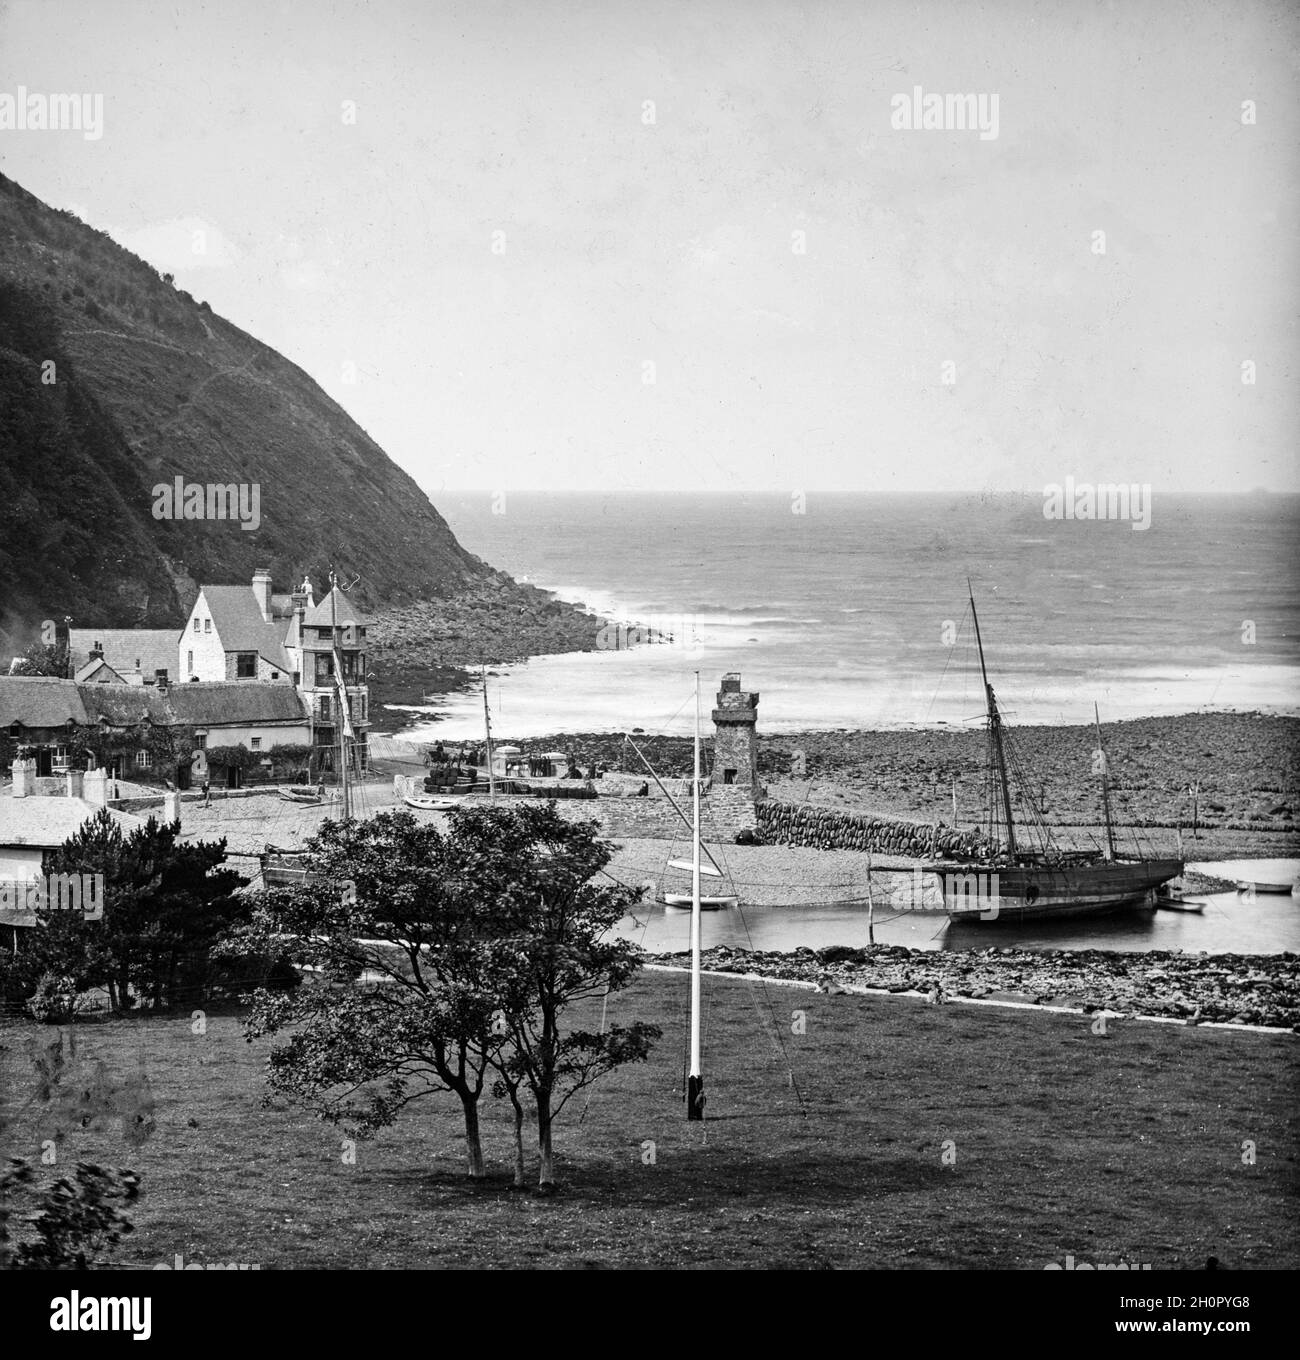 Vintage late Victorian black and white photograph showing the harbour at Lynmouth in Devon, England. On view is the Rhenish Tower along with sailing boats of the era. Stock Photo